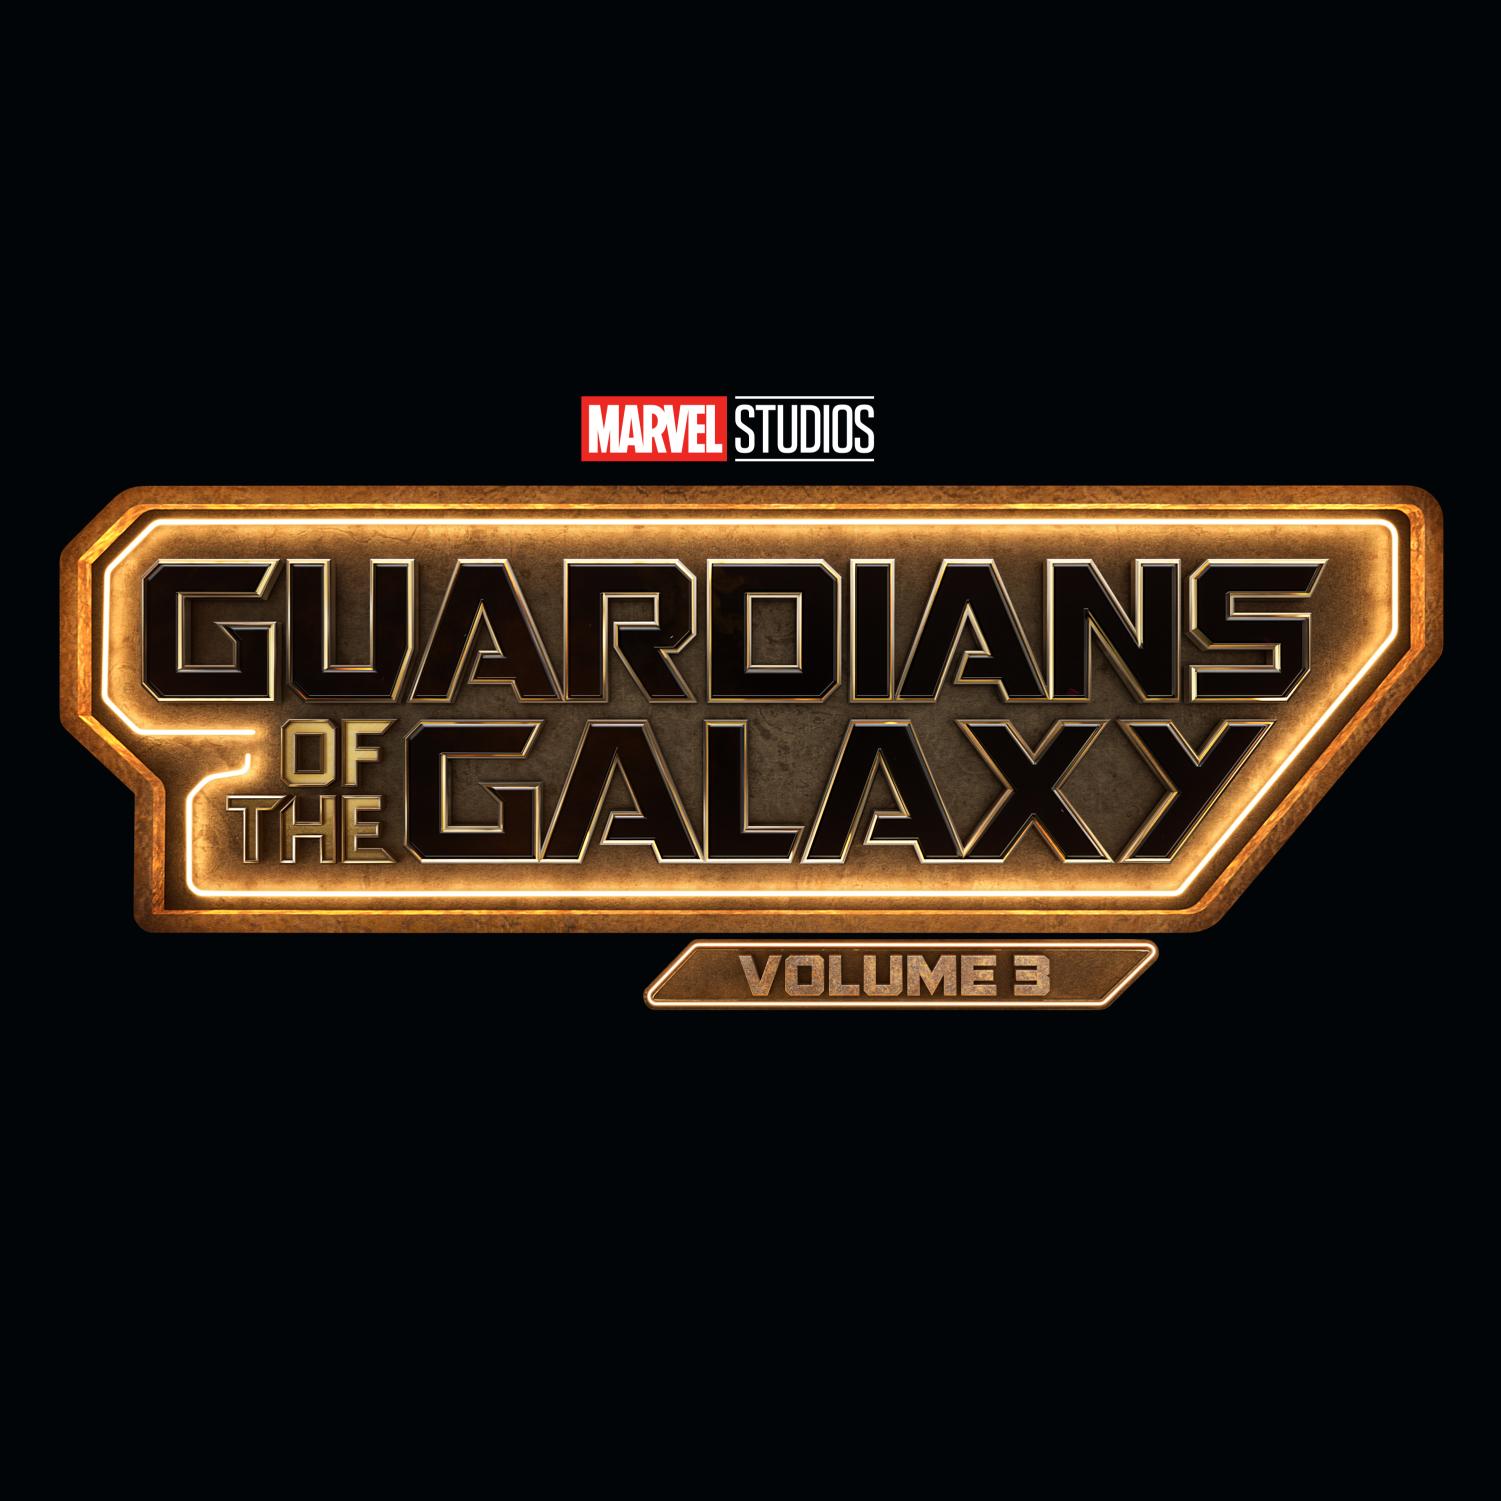 Guardians of the Galaxy Vol. 3: a character-driven masterpiece – The Voyager